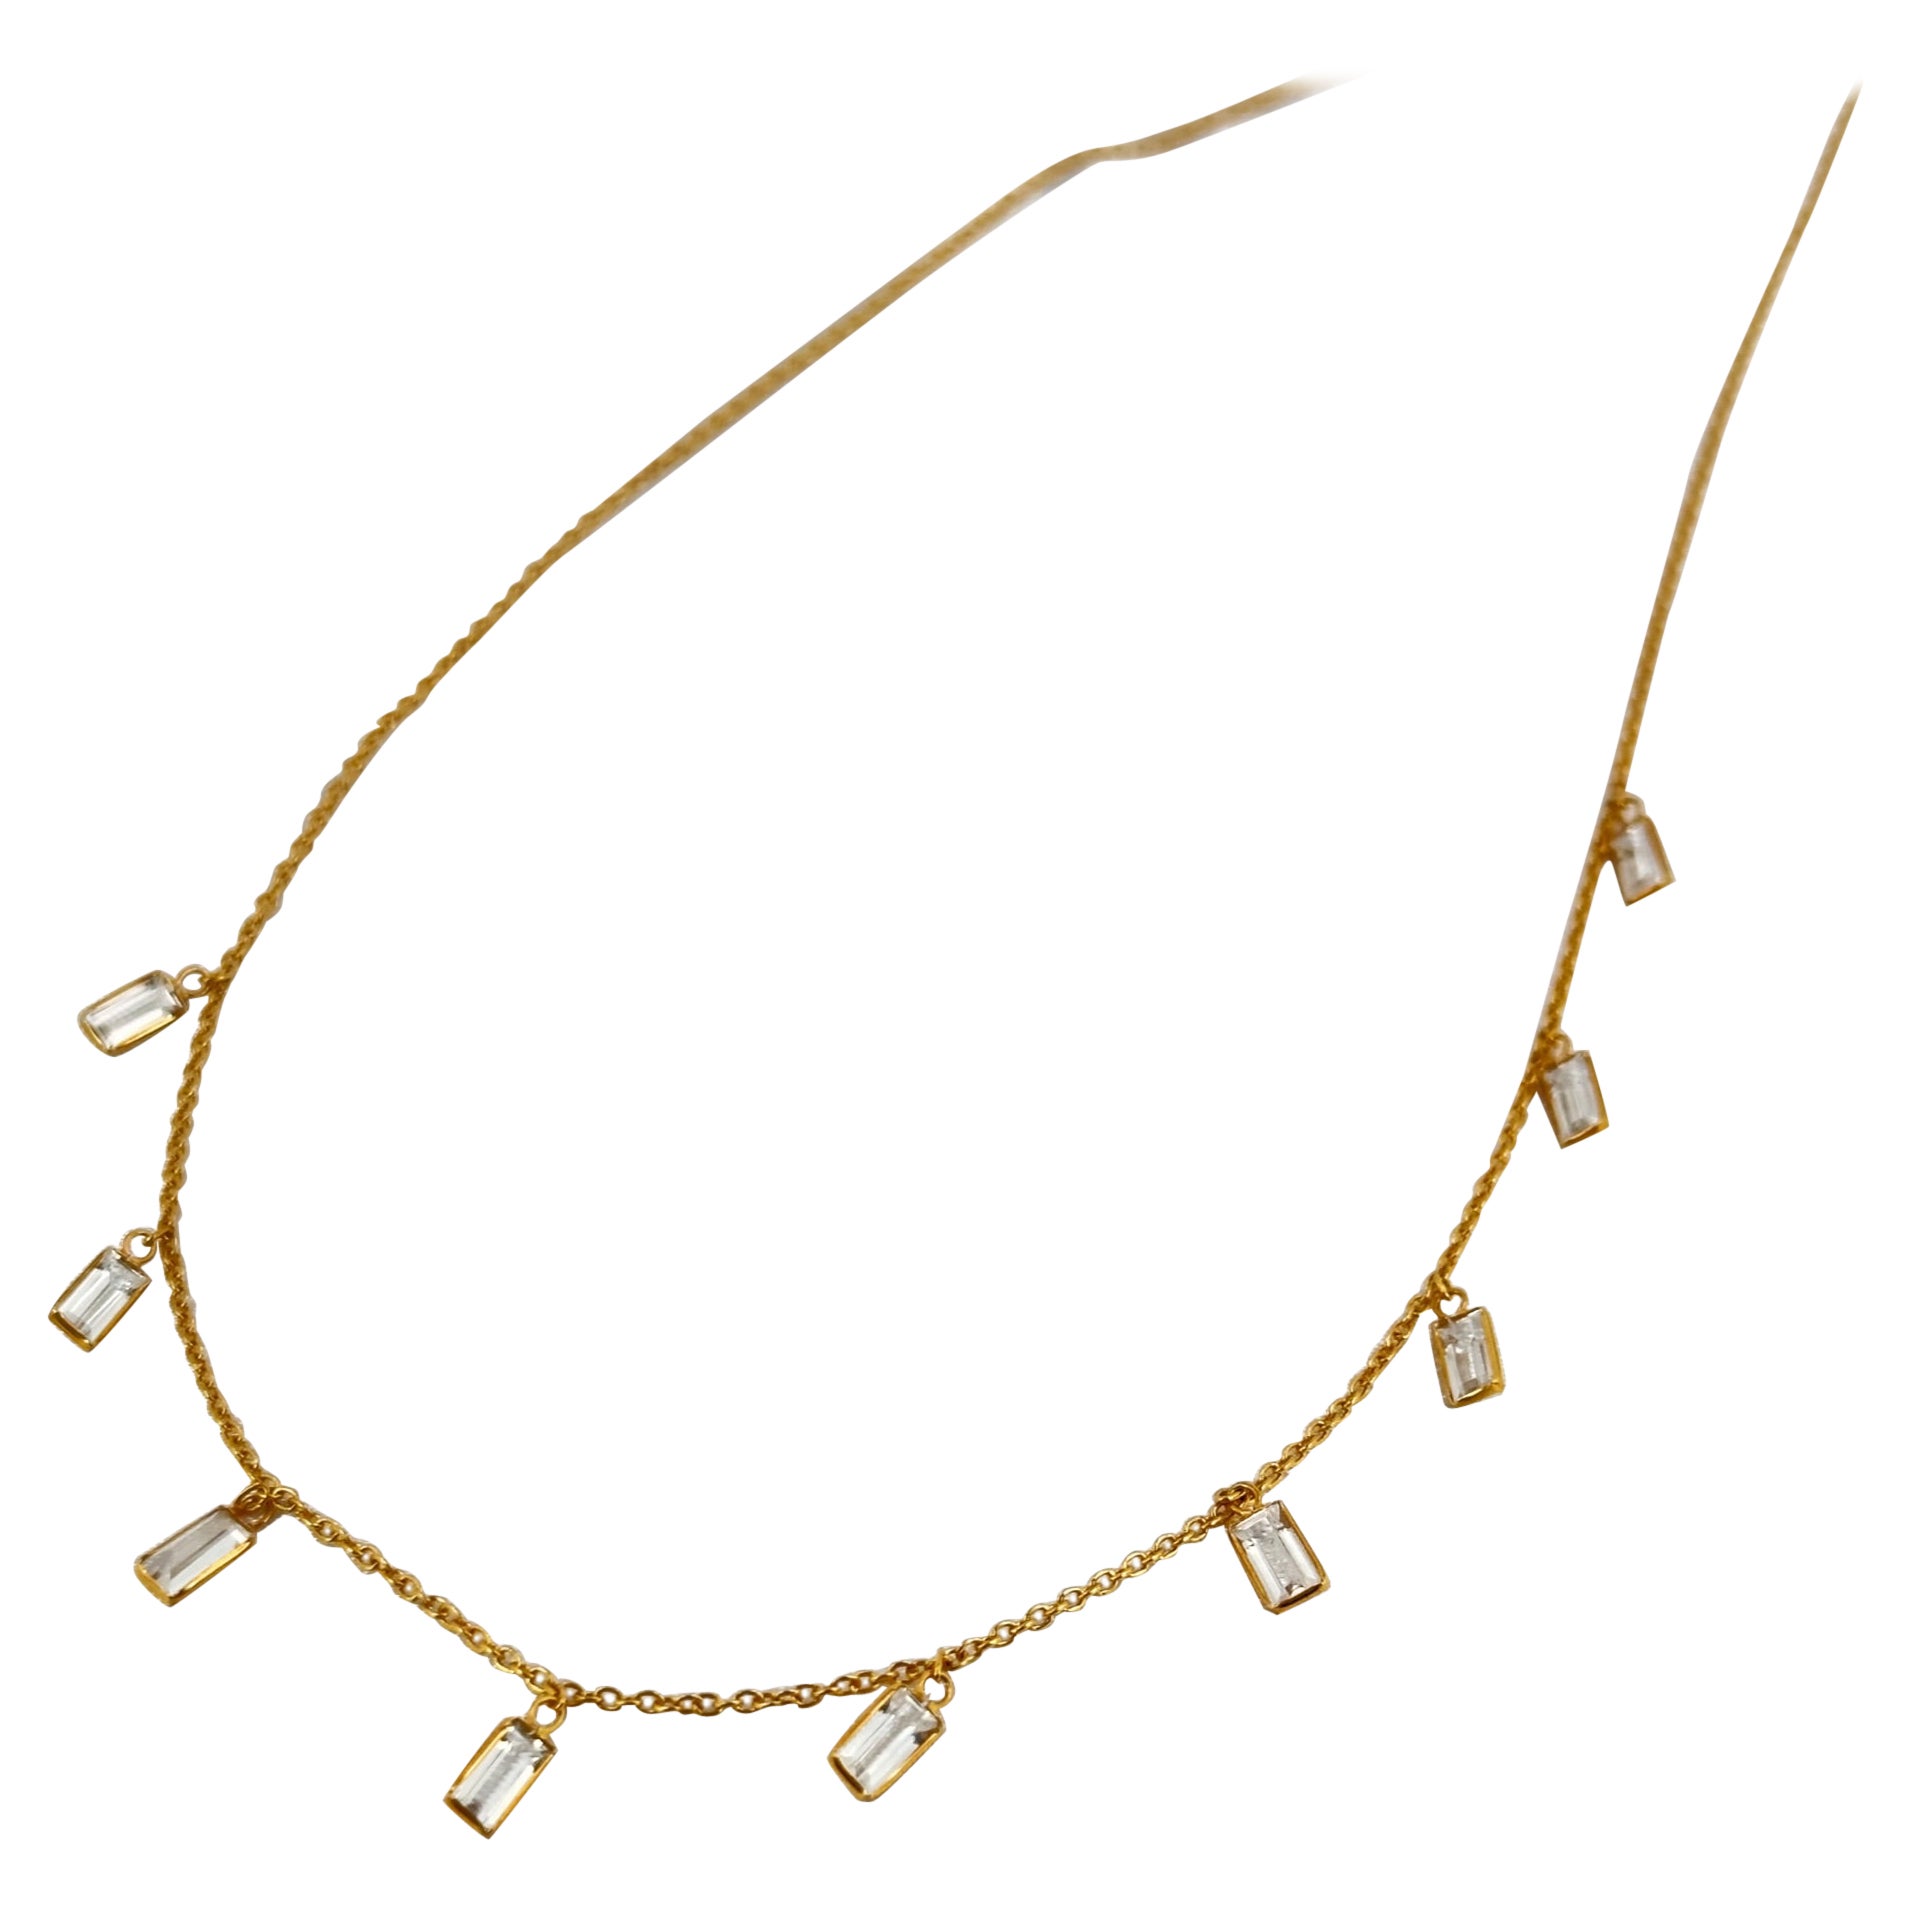 White sapphire dangle necklace

A dainty White Sapphire necklace is now available to be yours! Beautiful emerald cut sapphires are evenly spaced out at the bottom half of the chain! Our drop necklace is as beautiful as it is dainty! Dainty, but